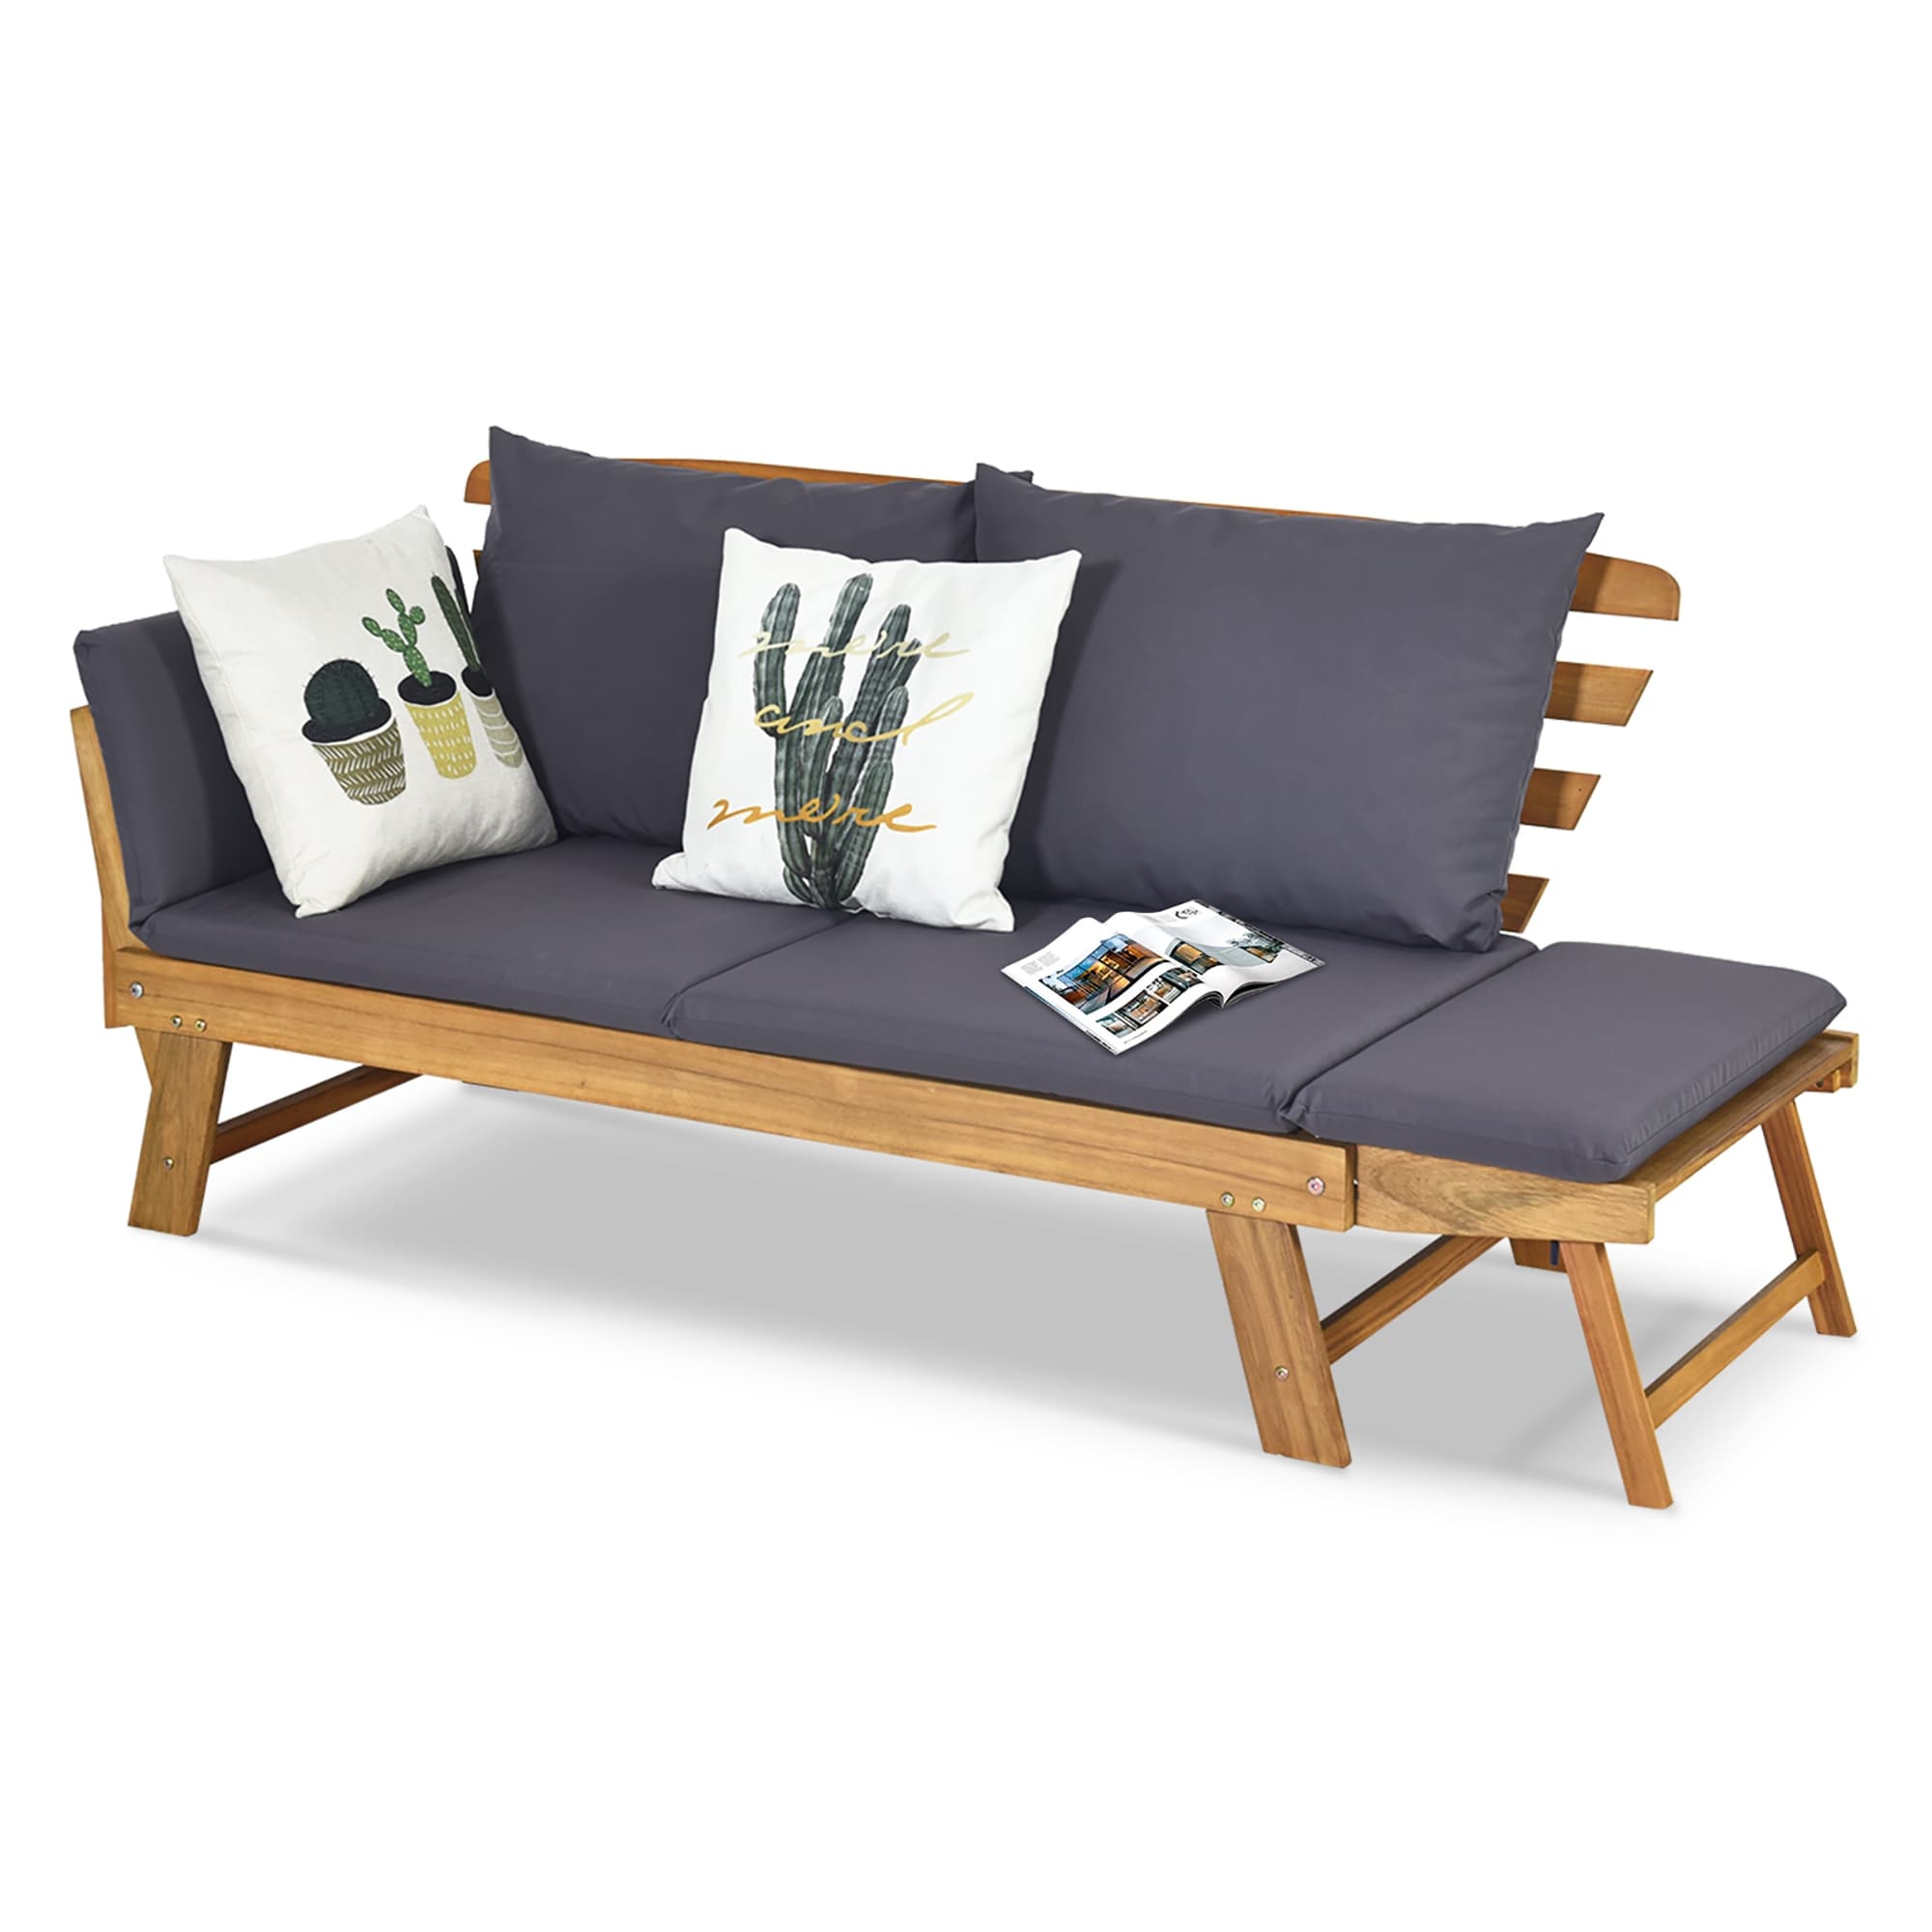 Pracht minimum Oppervlakte Gymax Adjustable Patio Sofa Daybed Acacia Wood Furniture w/ Cushion - See  Details - Overstock - 34383515